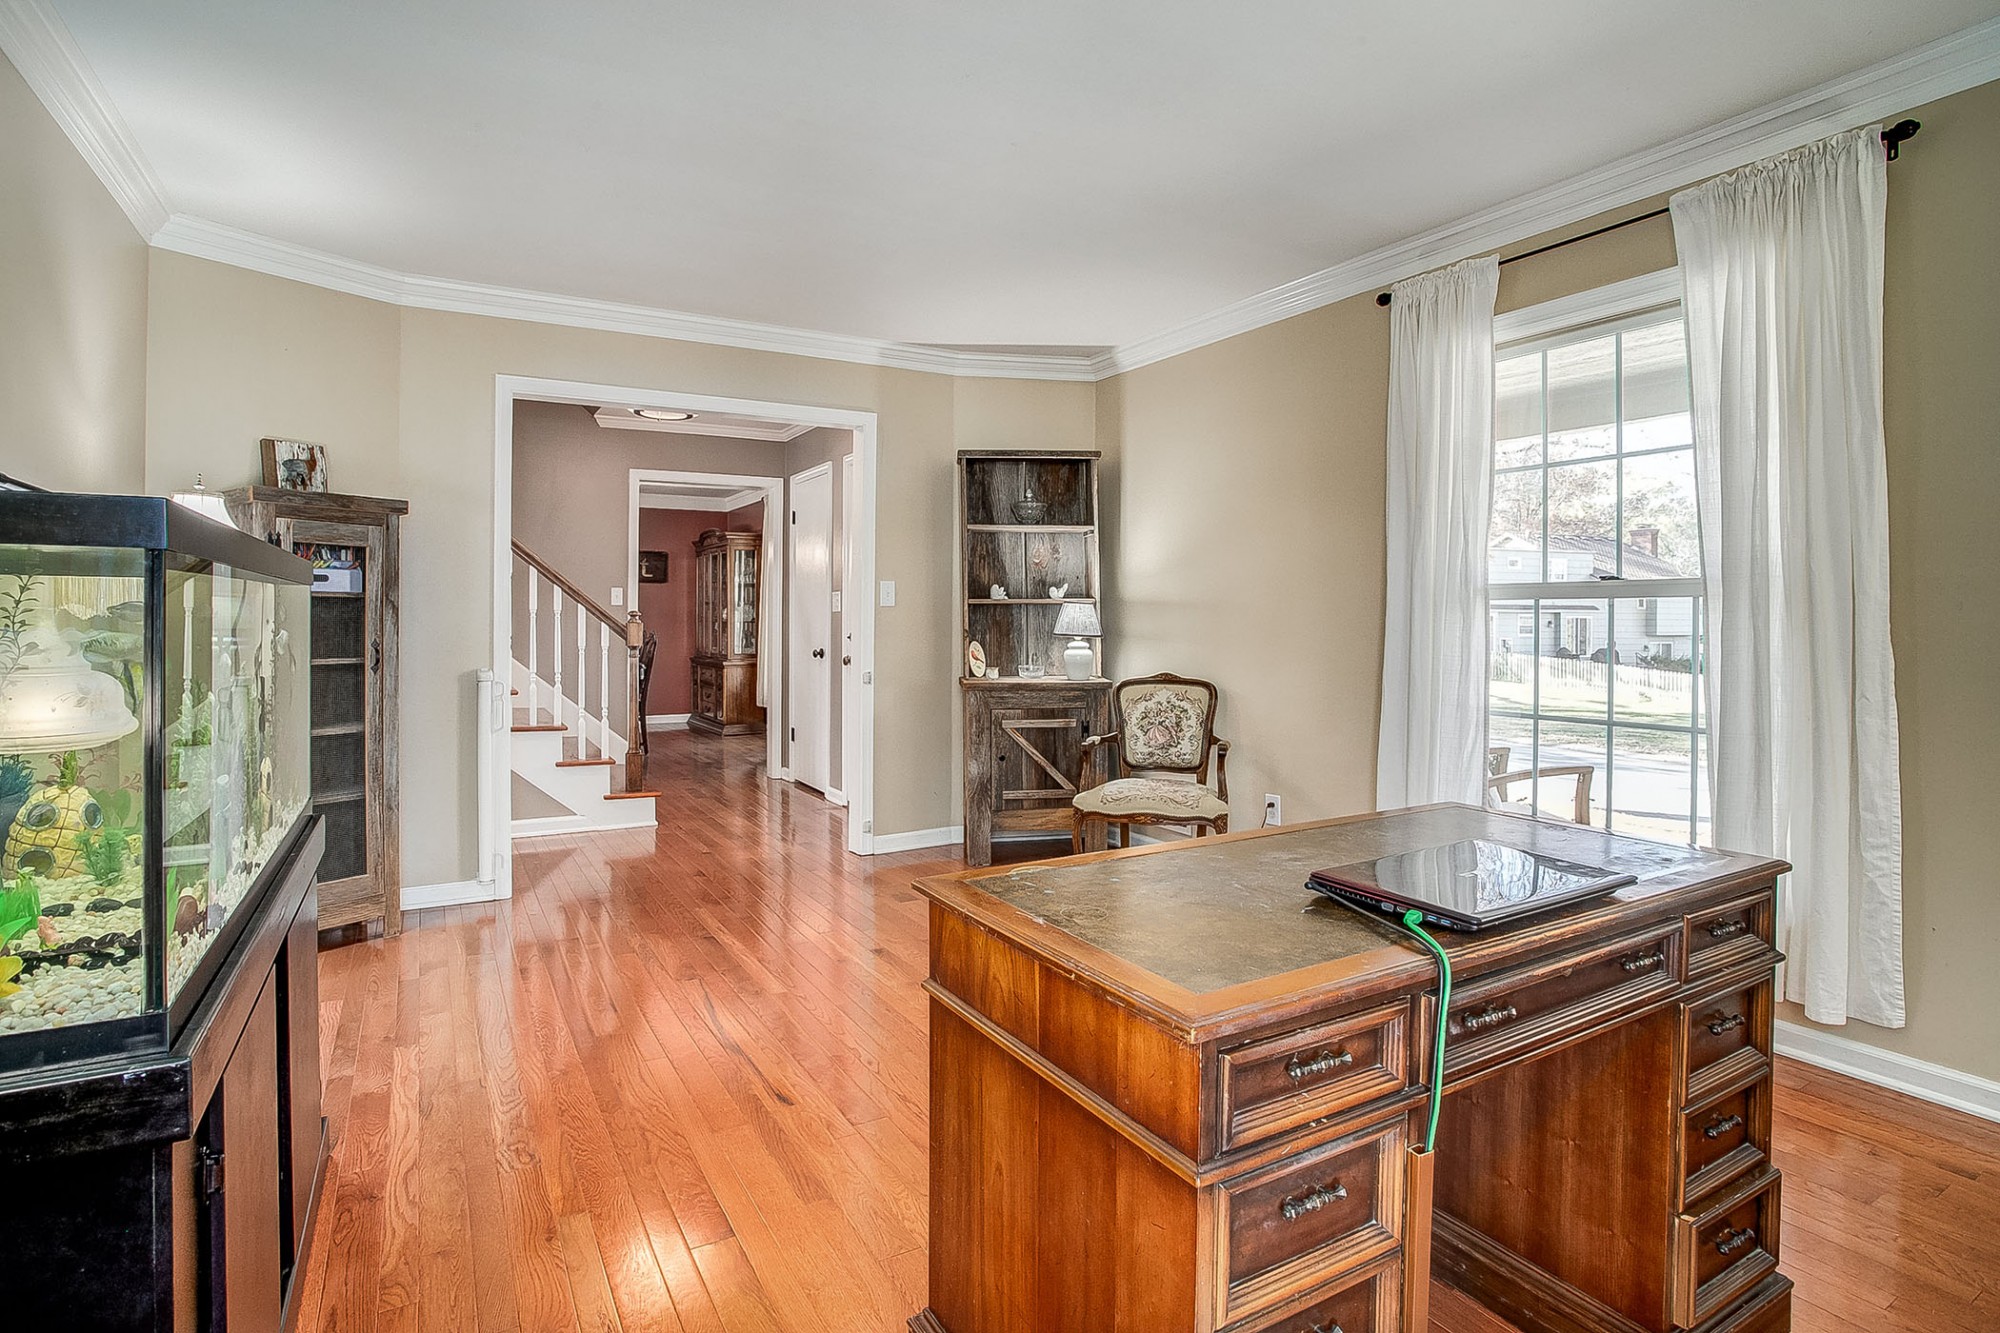 Step inside the foyer and notice the gleaming hardwood floors and the welcoming colors palette. 